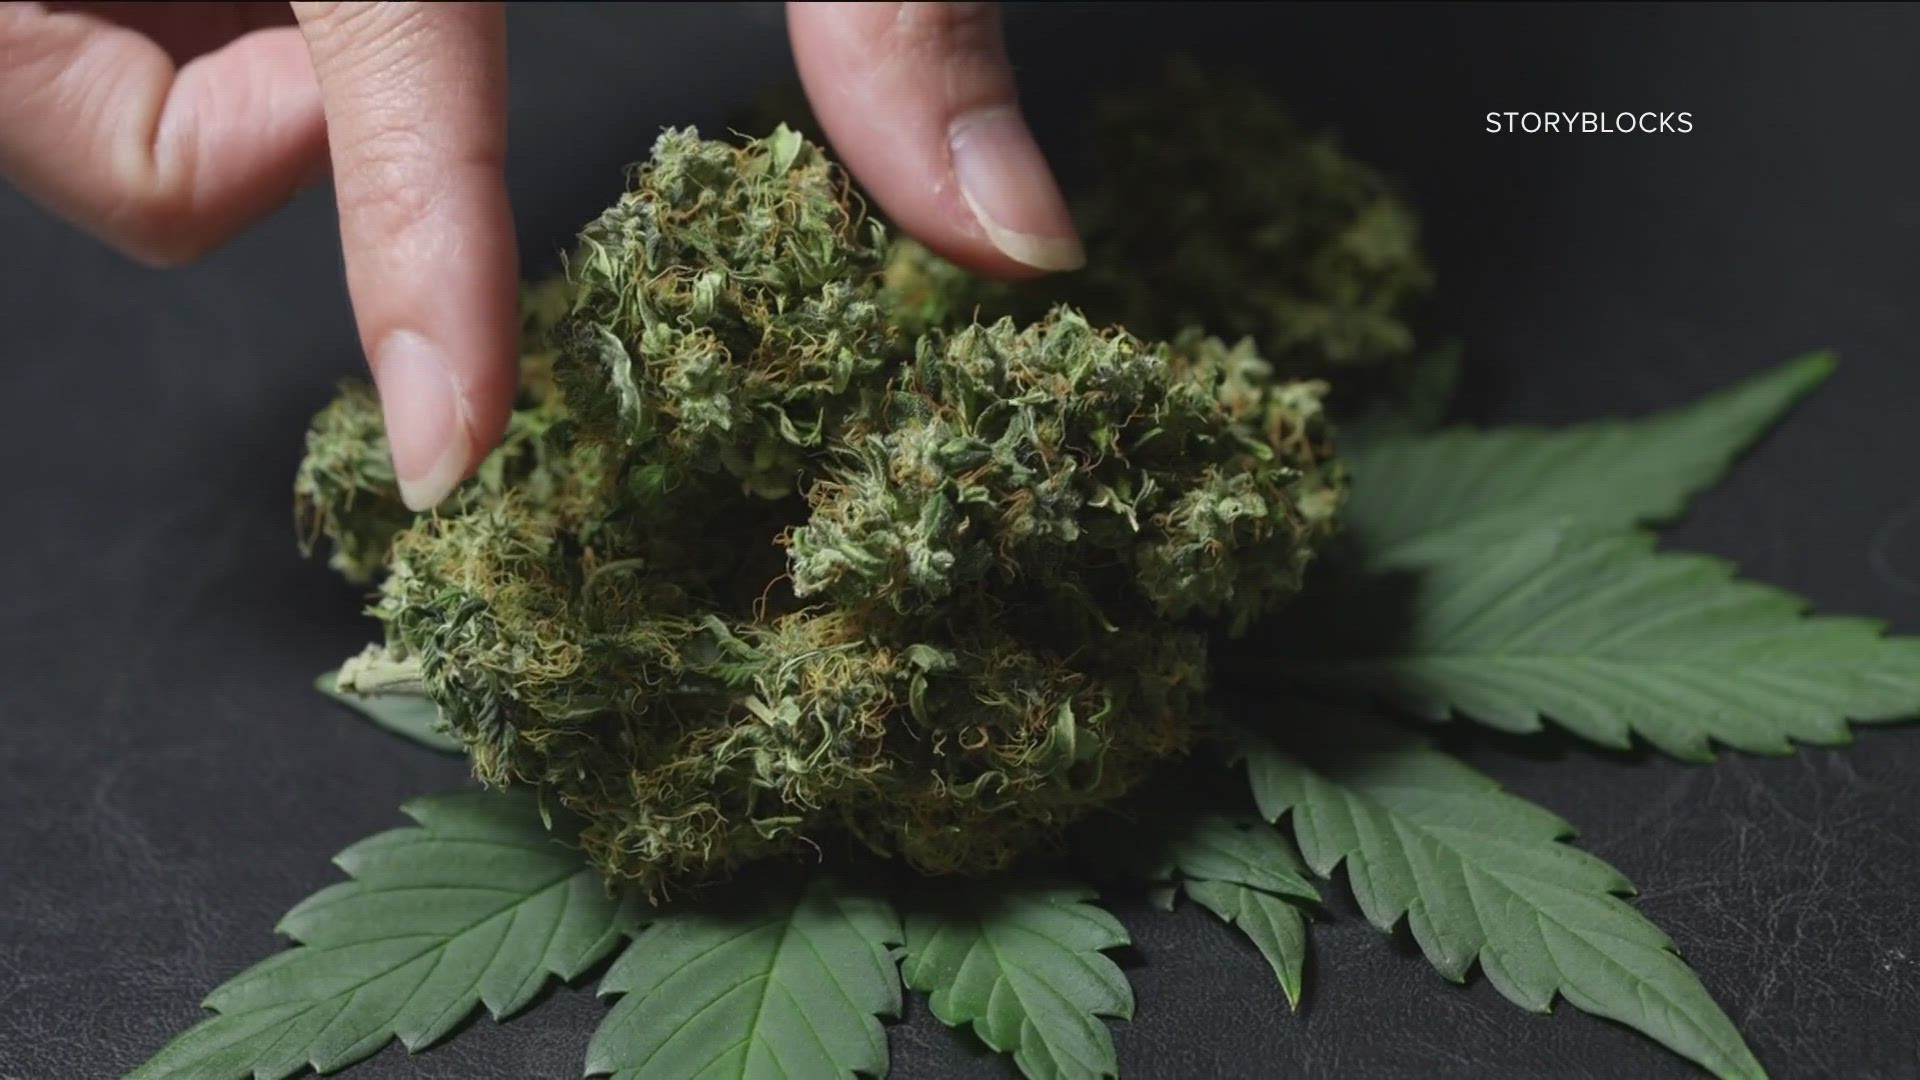 Medical marijuana was passed in Arkansas in 2016. Now new revisions are expected on the November ballot. Watch the video to learn more.